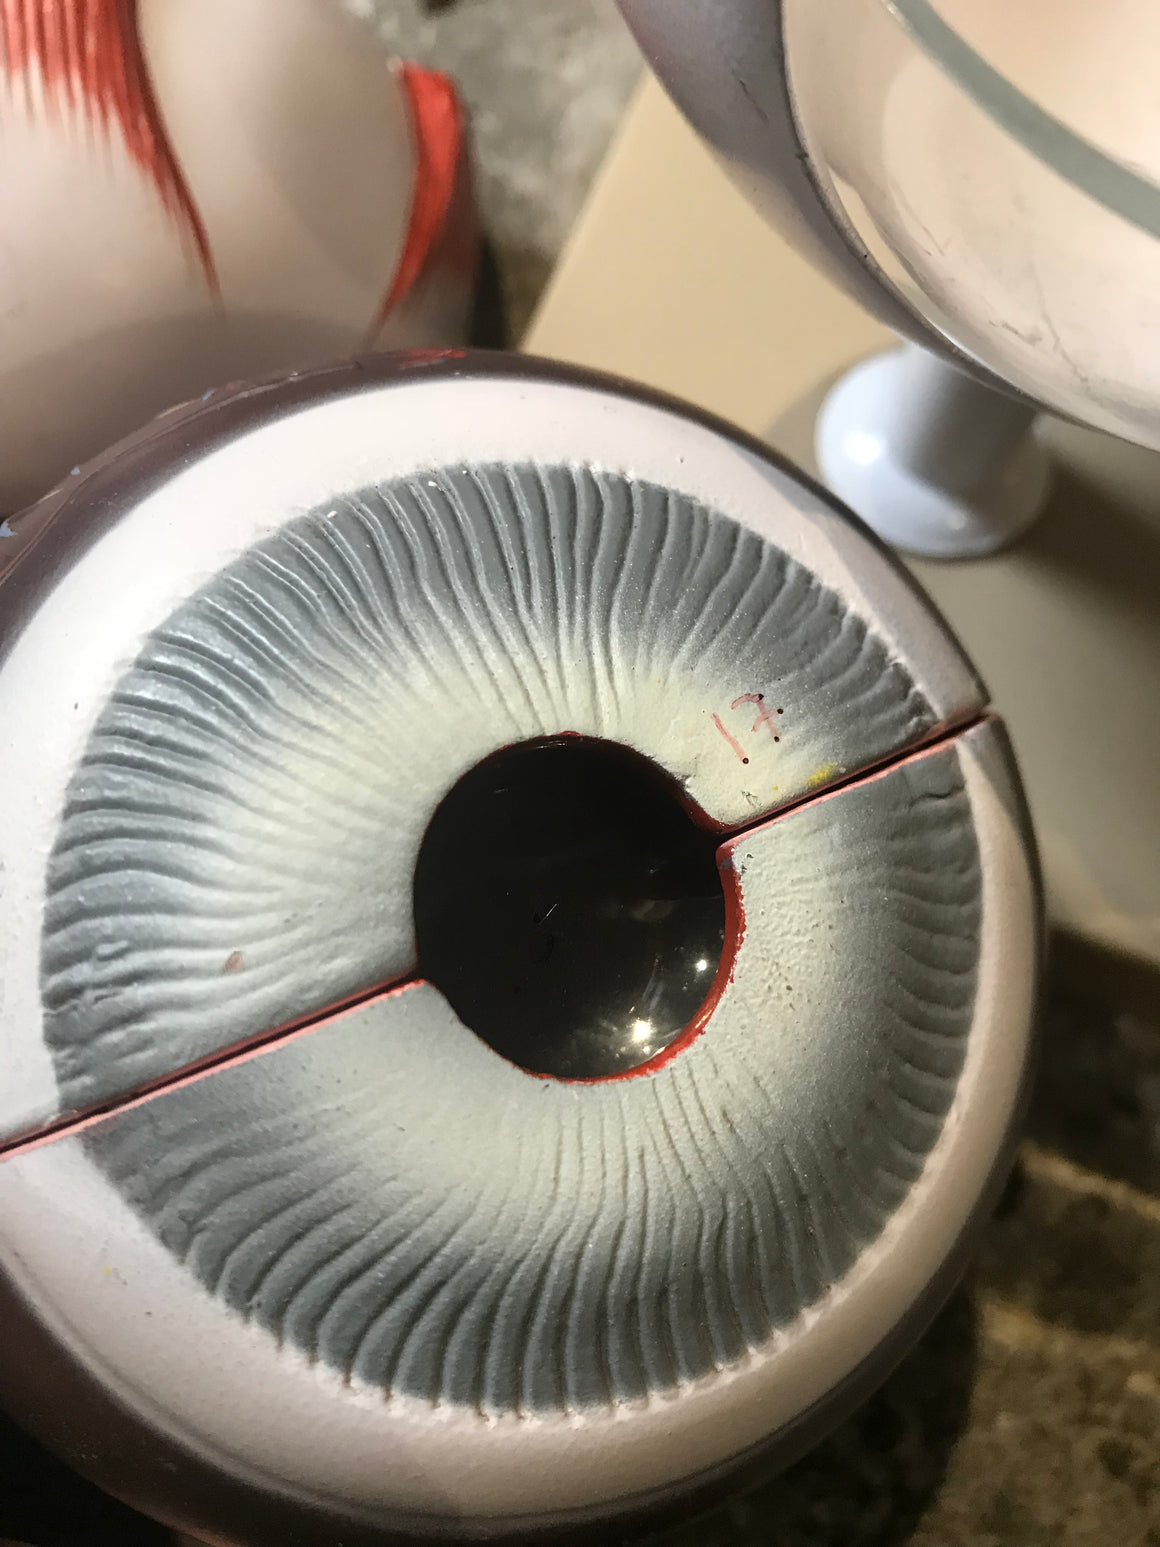 An interactive anatomical model of an eye on a stand